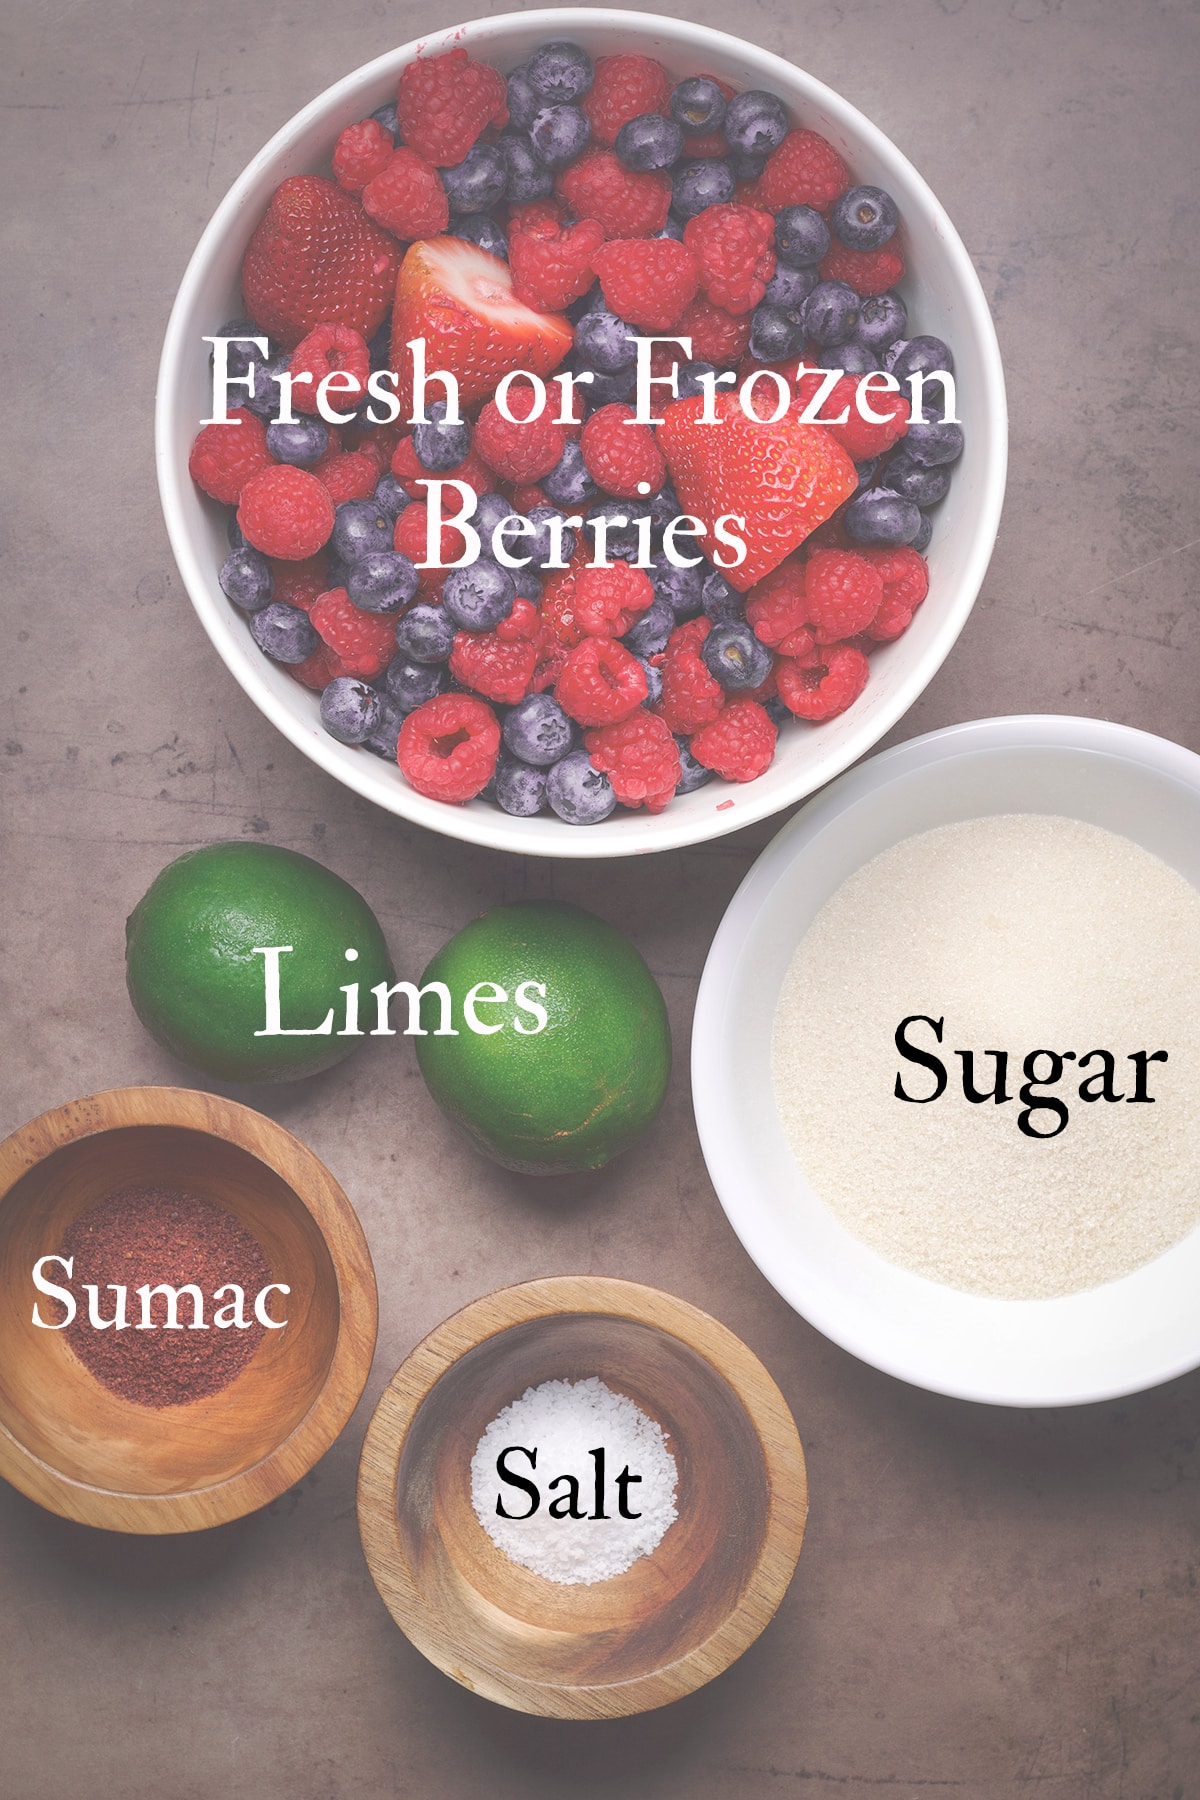 All the ingredients needed to make this easy berry sauce recipe.